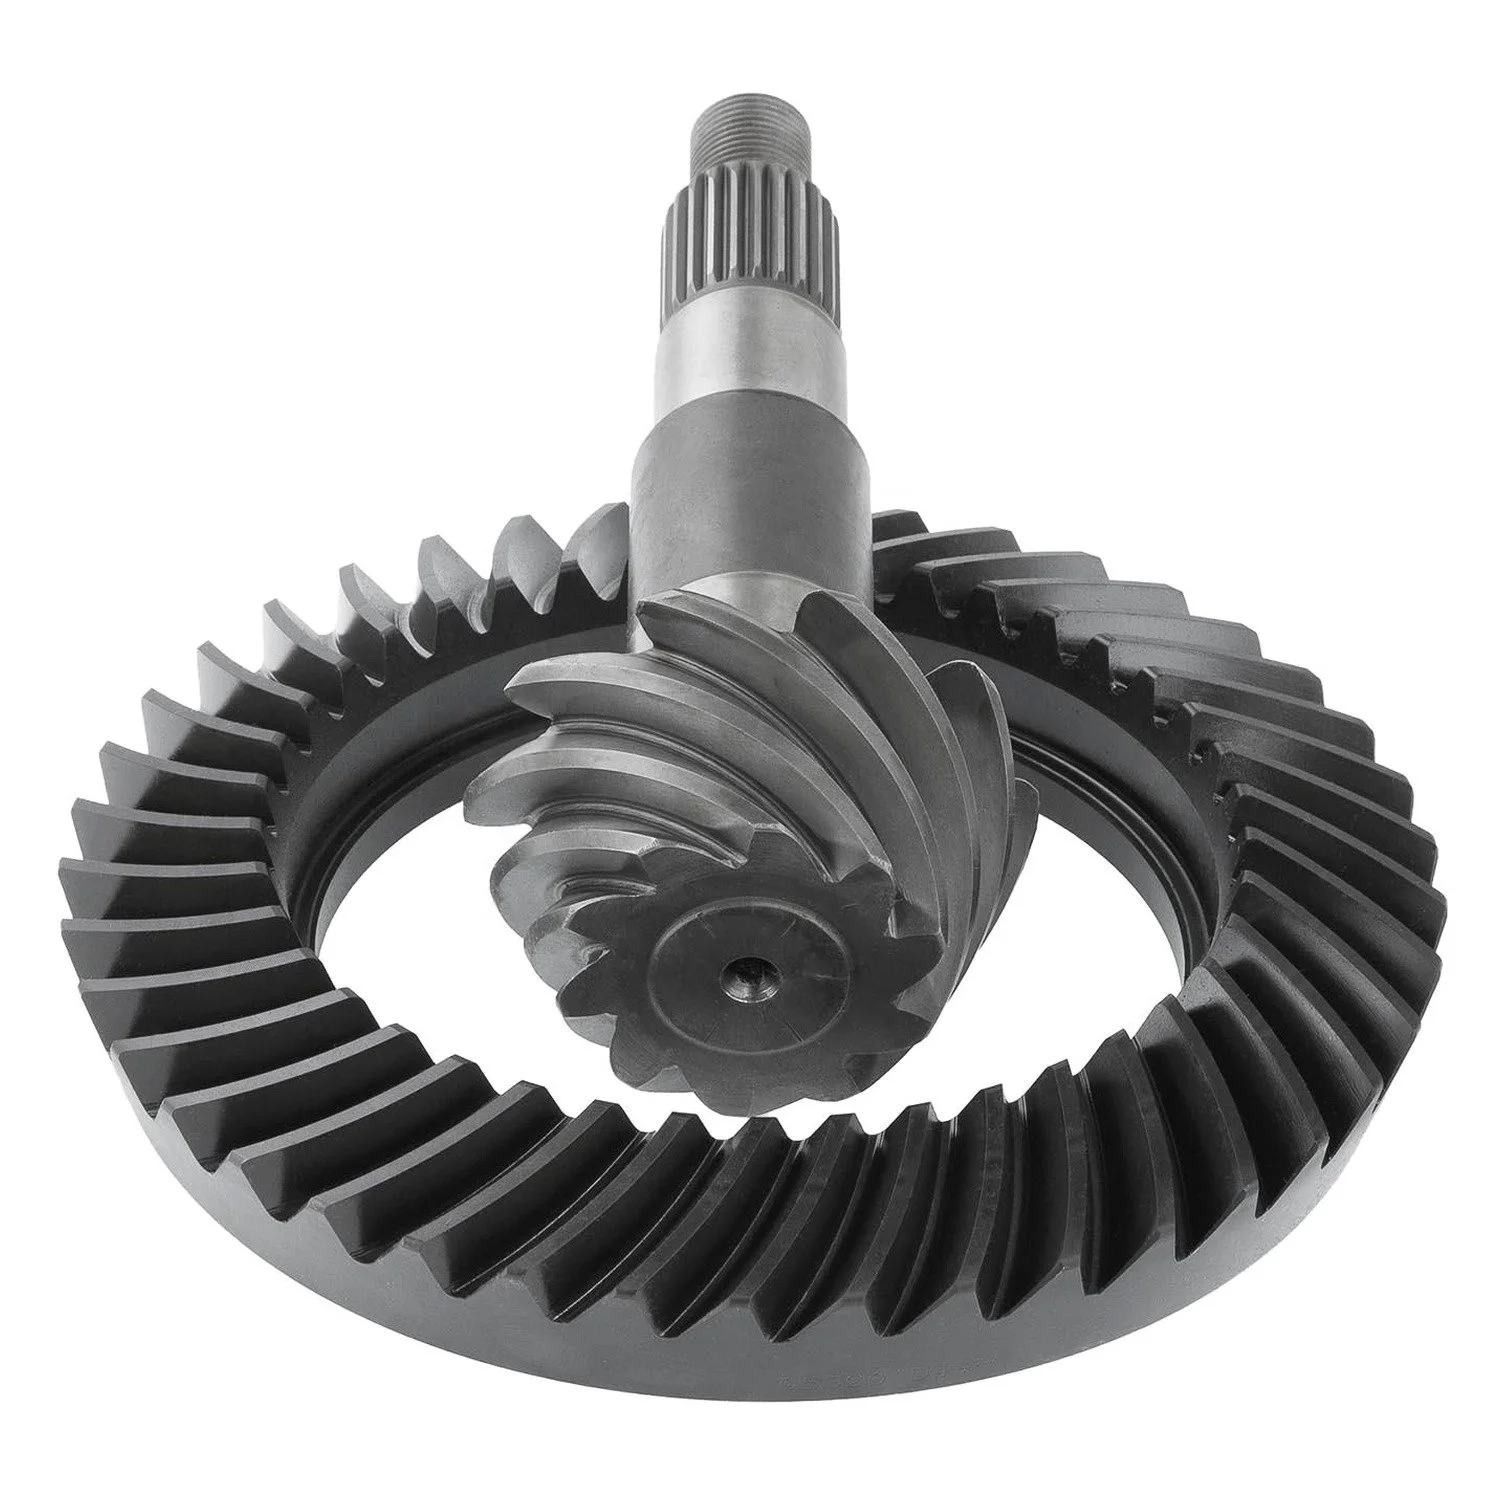 
2005 HILUX GGN15R pinion and crown gear 43/12 ratio for toyota 41201 09010  (62375719917)